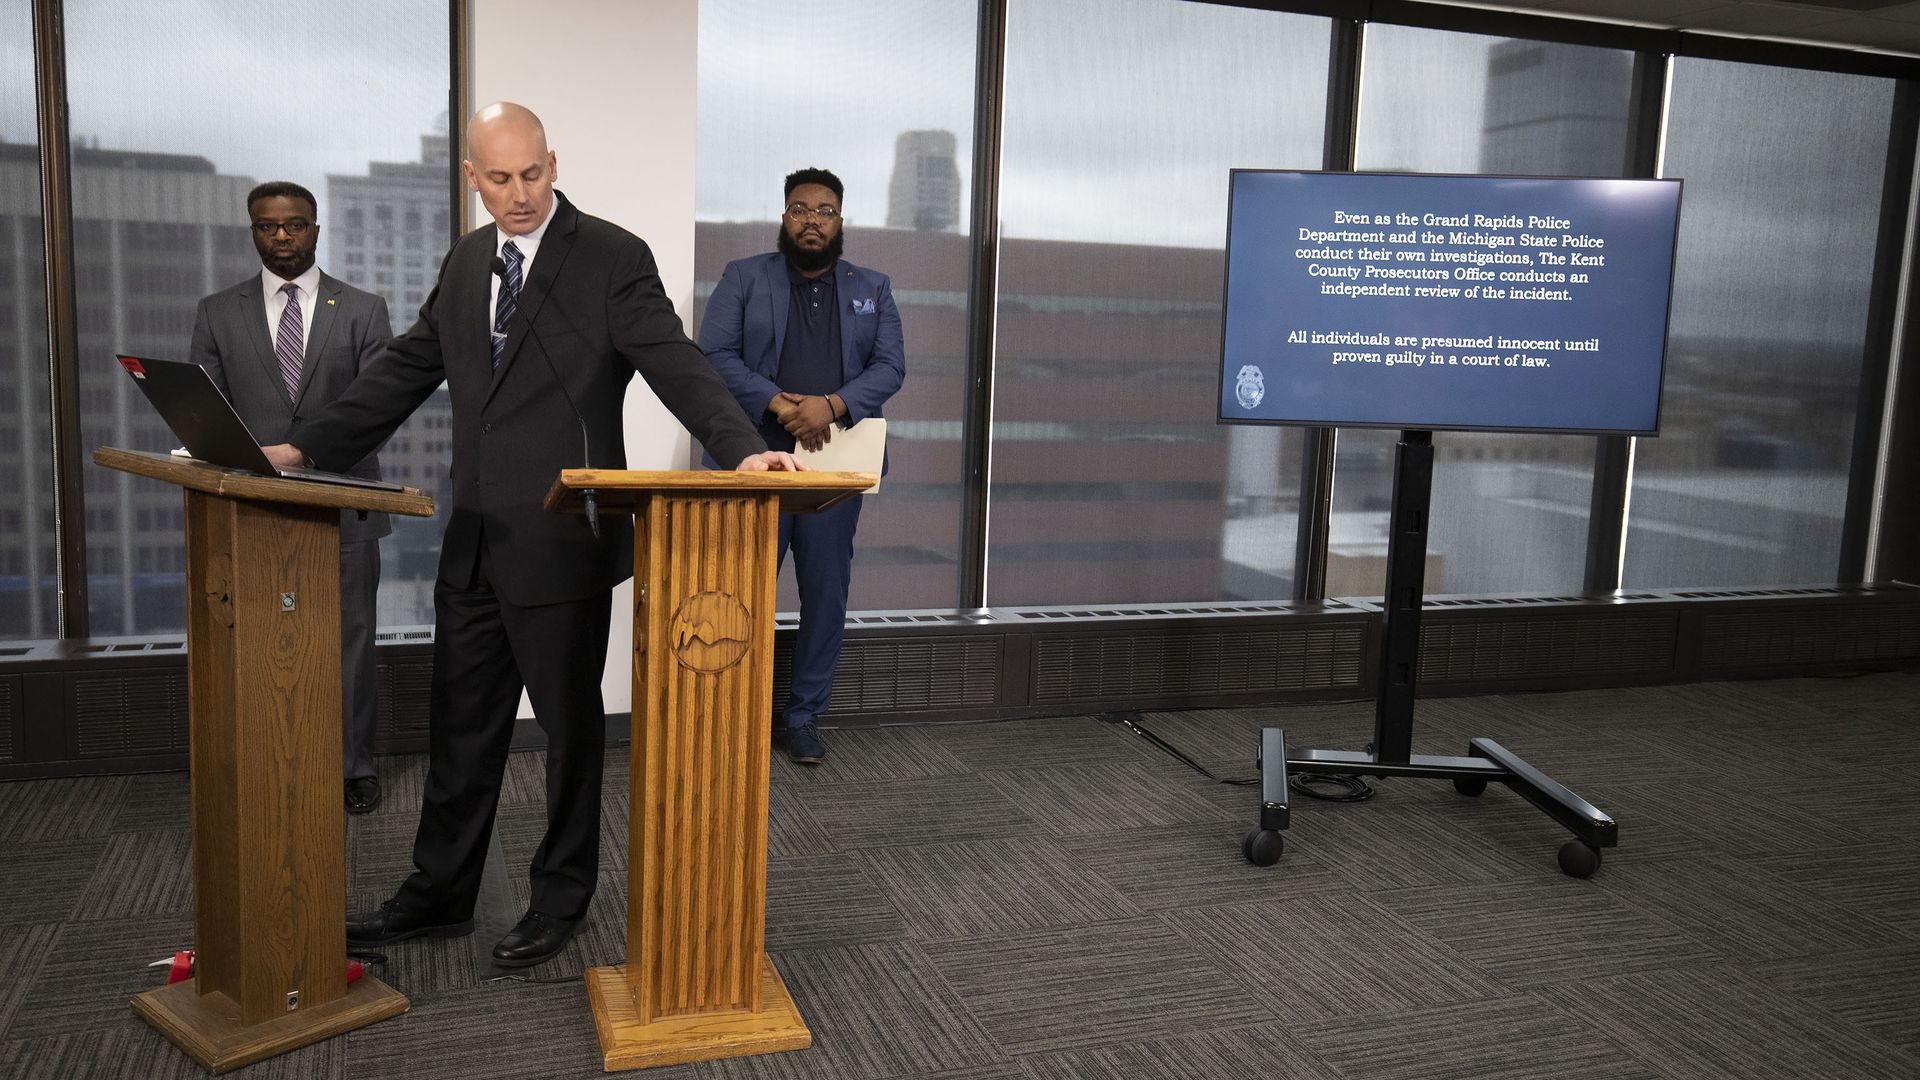 Grand Rapids City Manager Mark Washington, Grand Rapids Police Chief Eric Winstrom and Brandy Davis stand at a press conference.